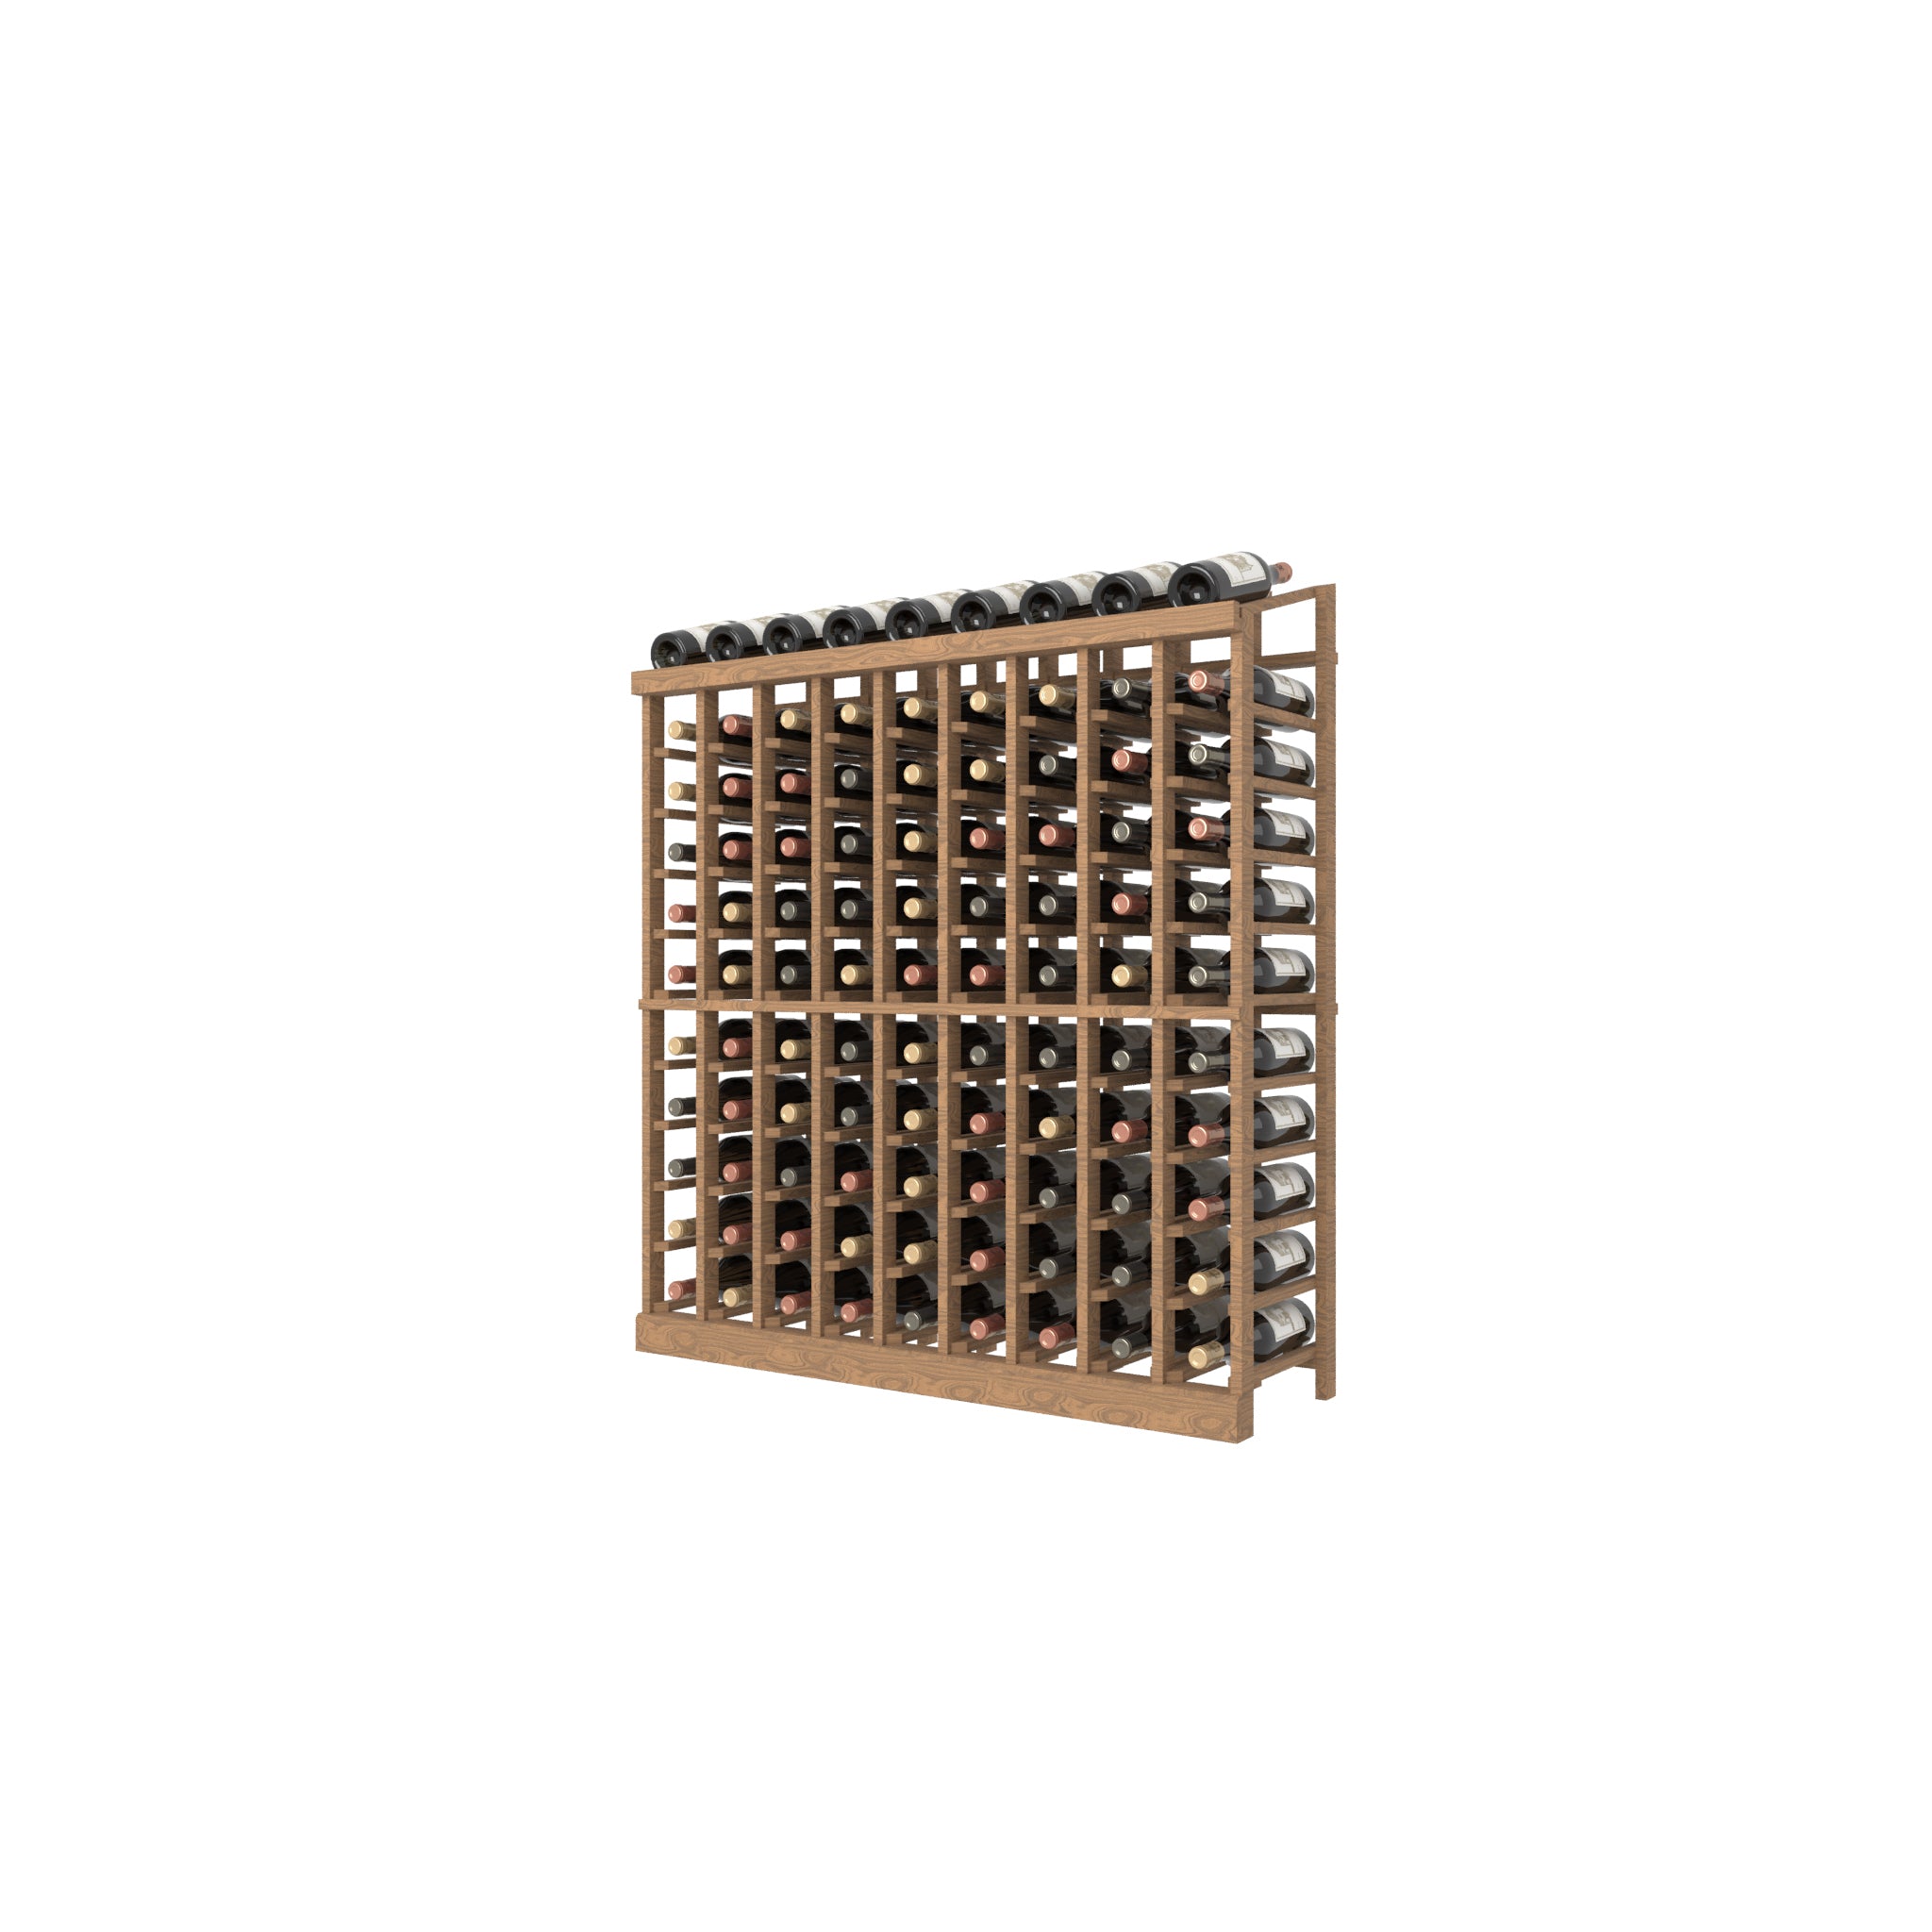 Individual bottle wood Wine Rack with a display row - 9 Column 11 rows